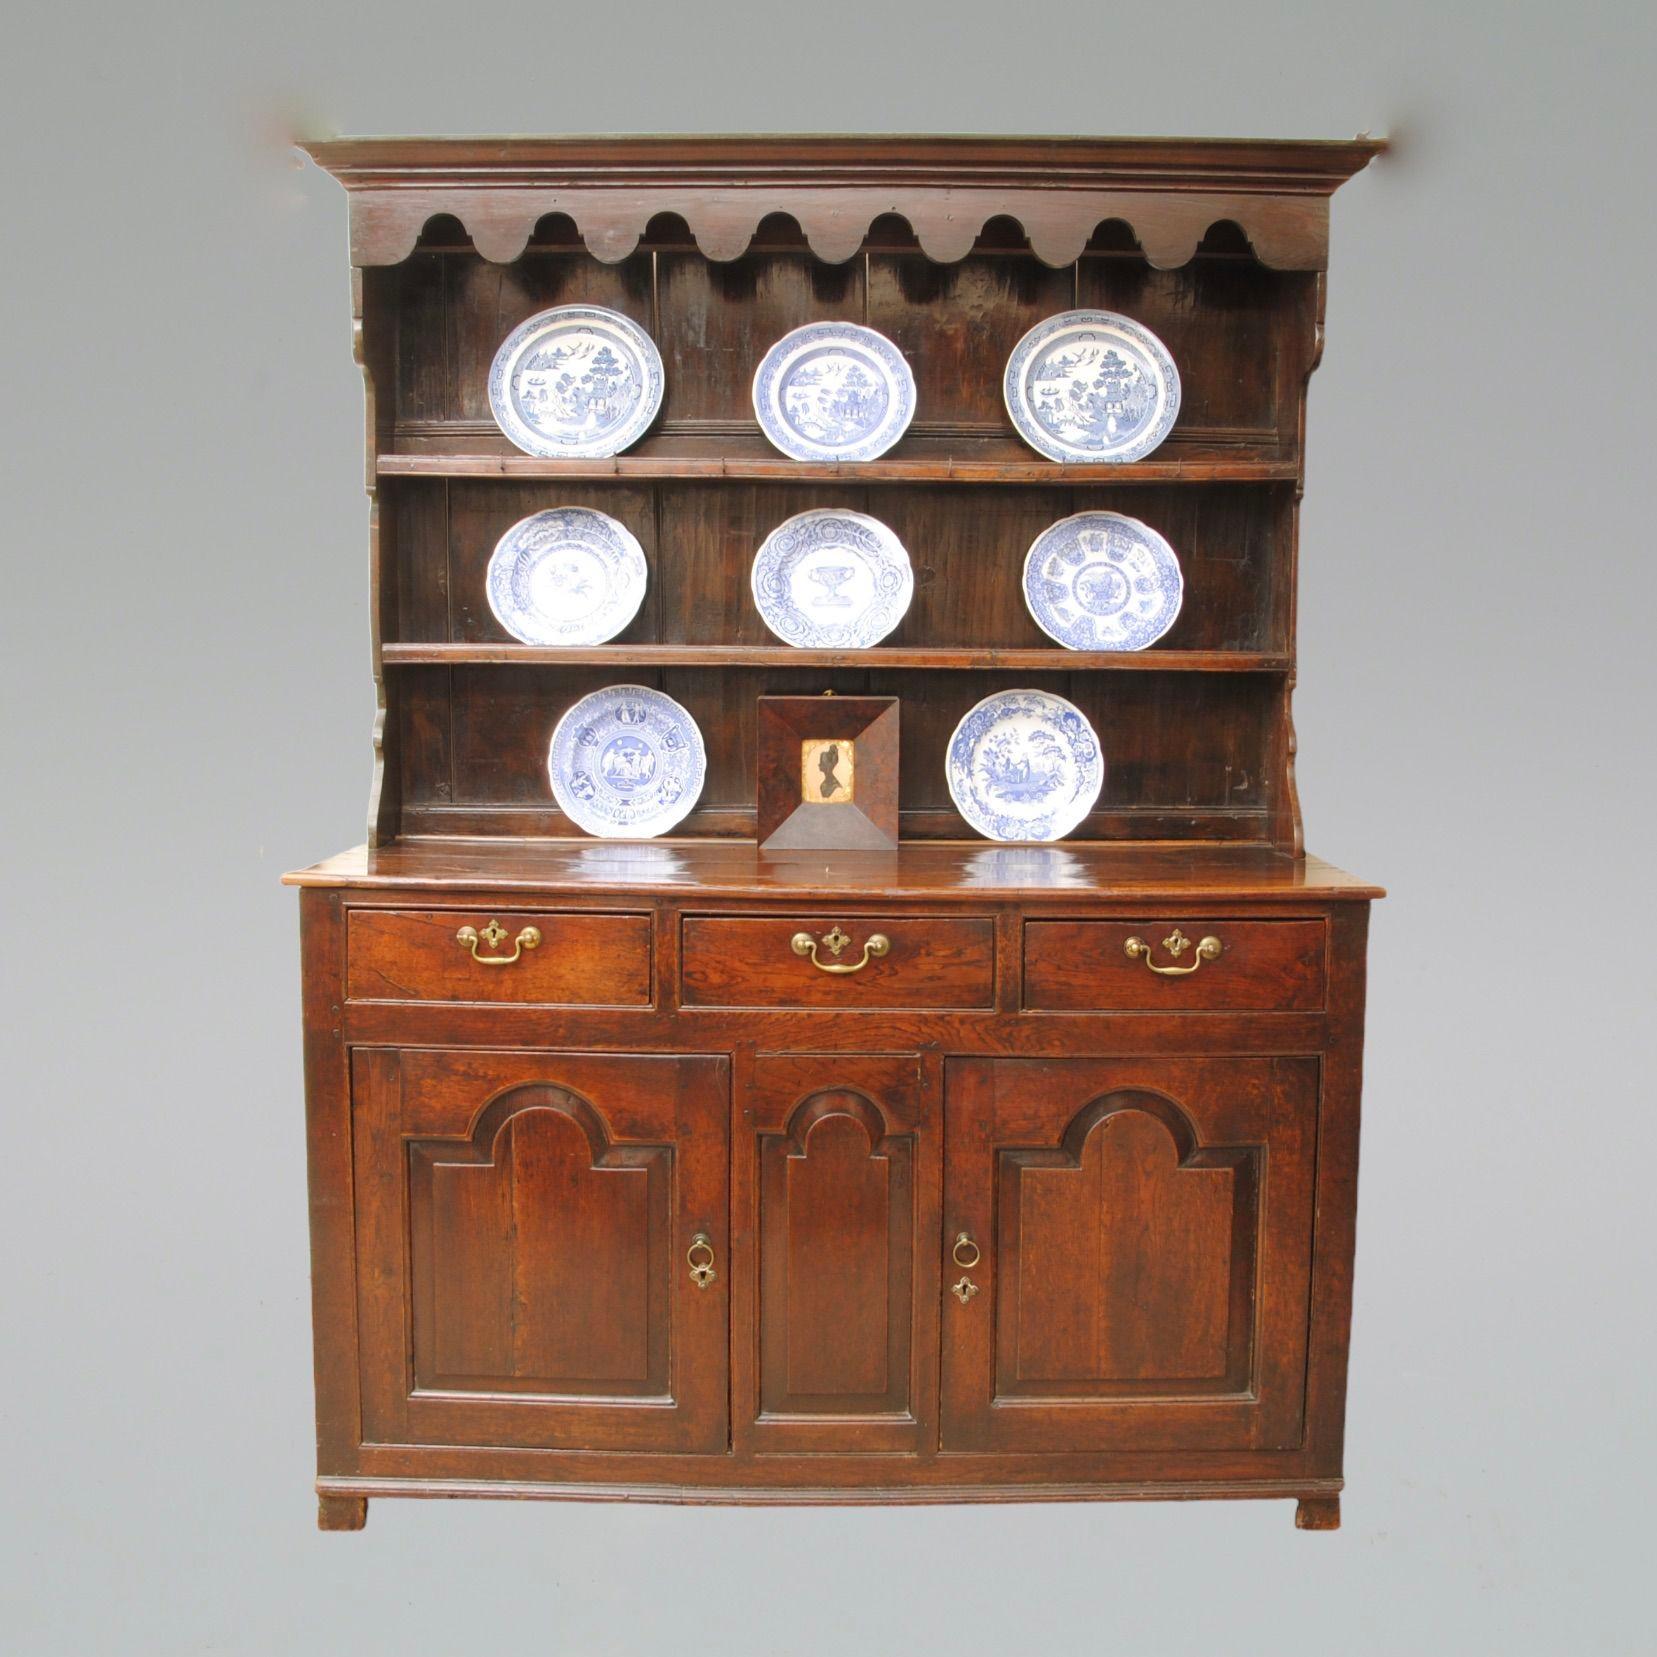 A super 18th century welsh oak dresser and original rack, with arch shaped panels and top frieze, the whole of a wonderful rich warm colour with a fantastic patina.